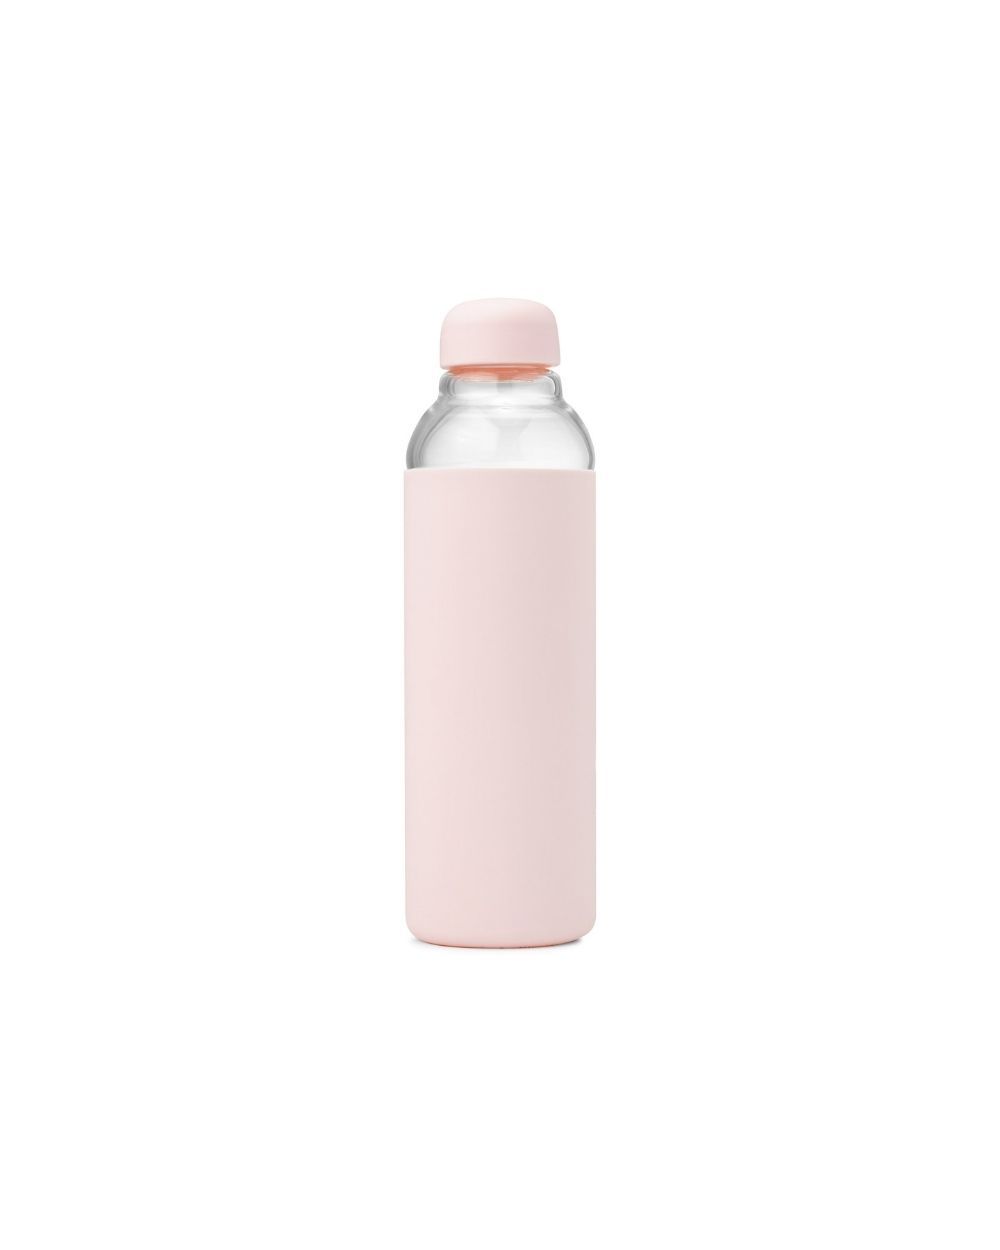 Water Bottle With Silicone Sleeve